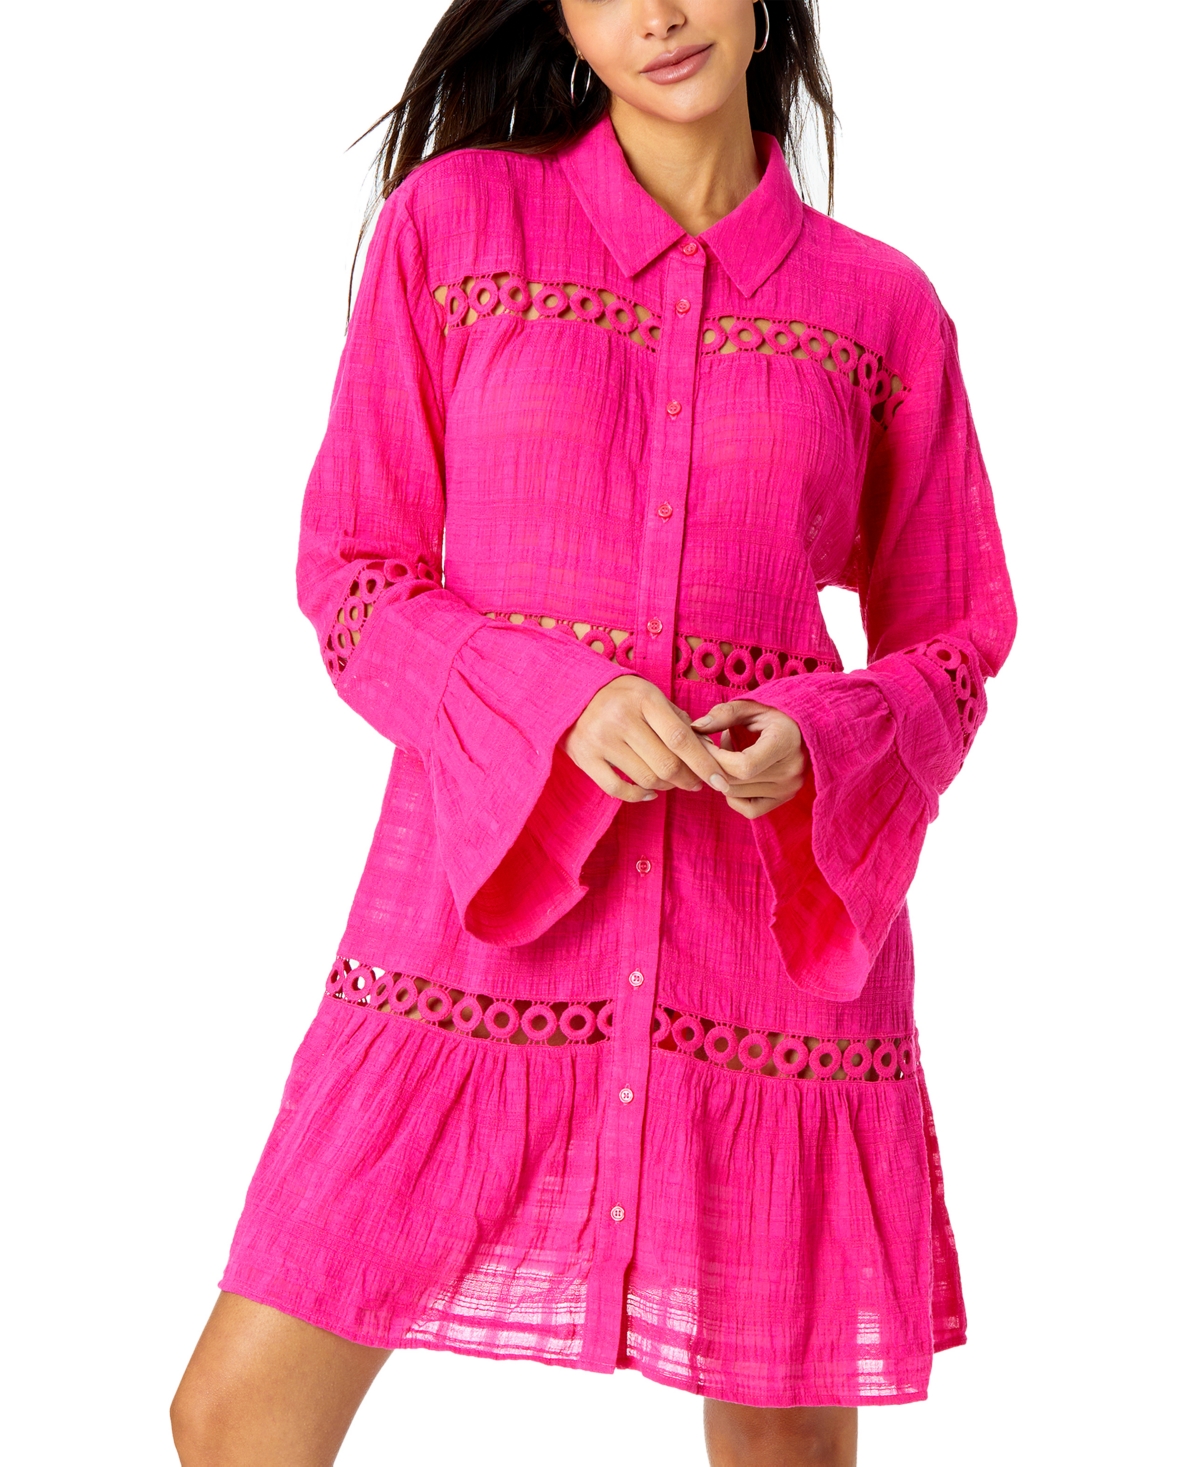 Women's Cotton Bell-Sleeve Cover-Up Tunic - Raspberry Pink